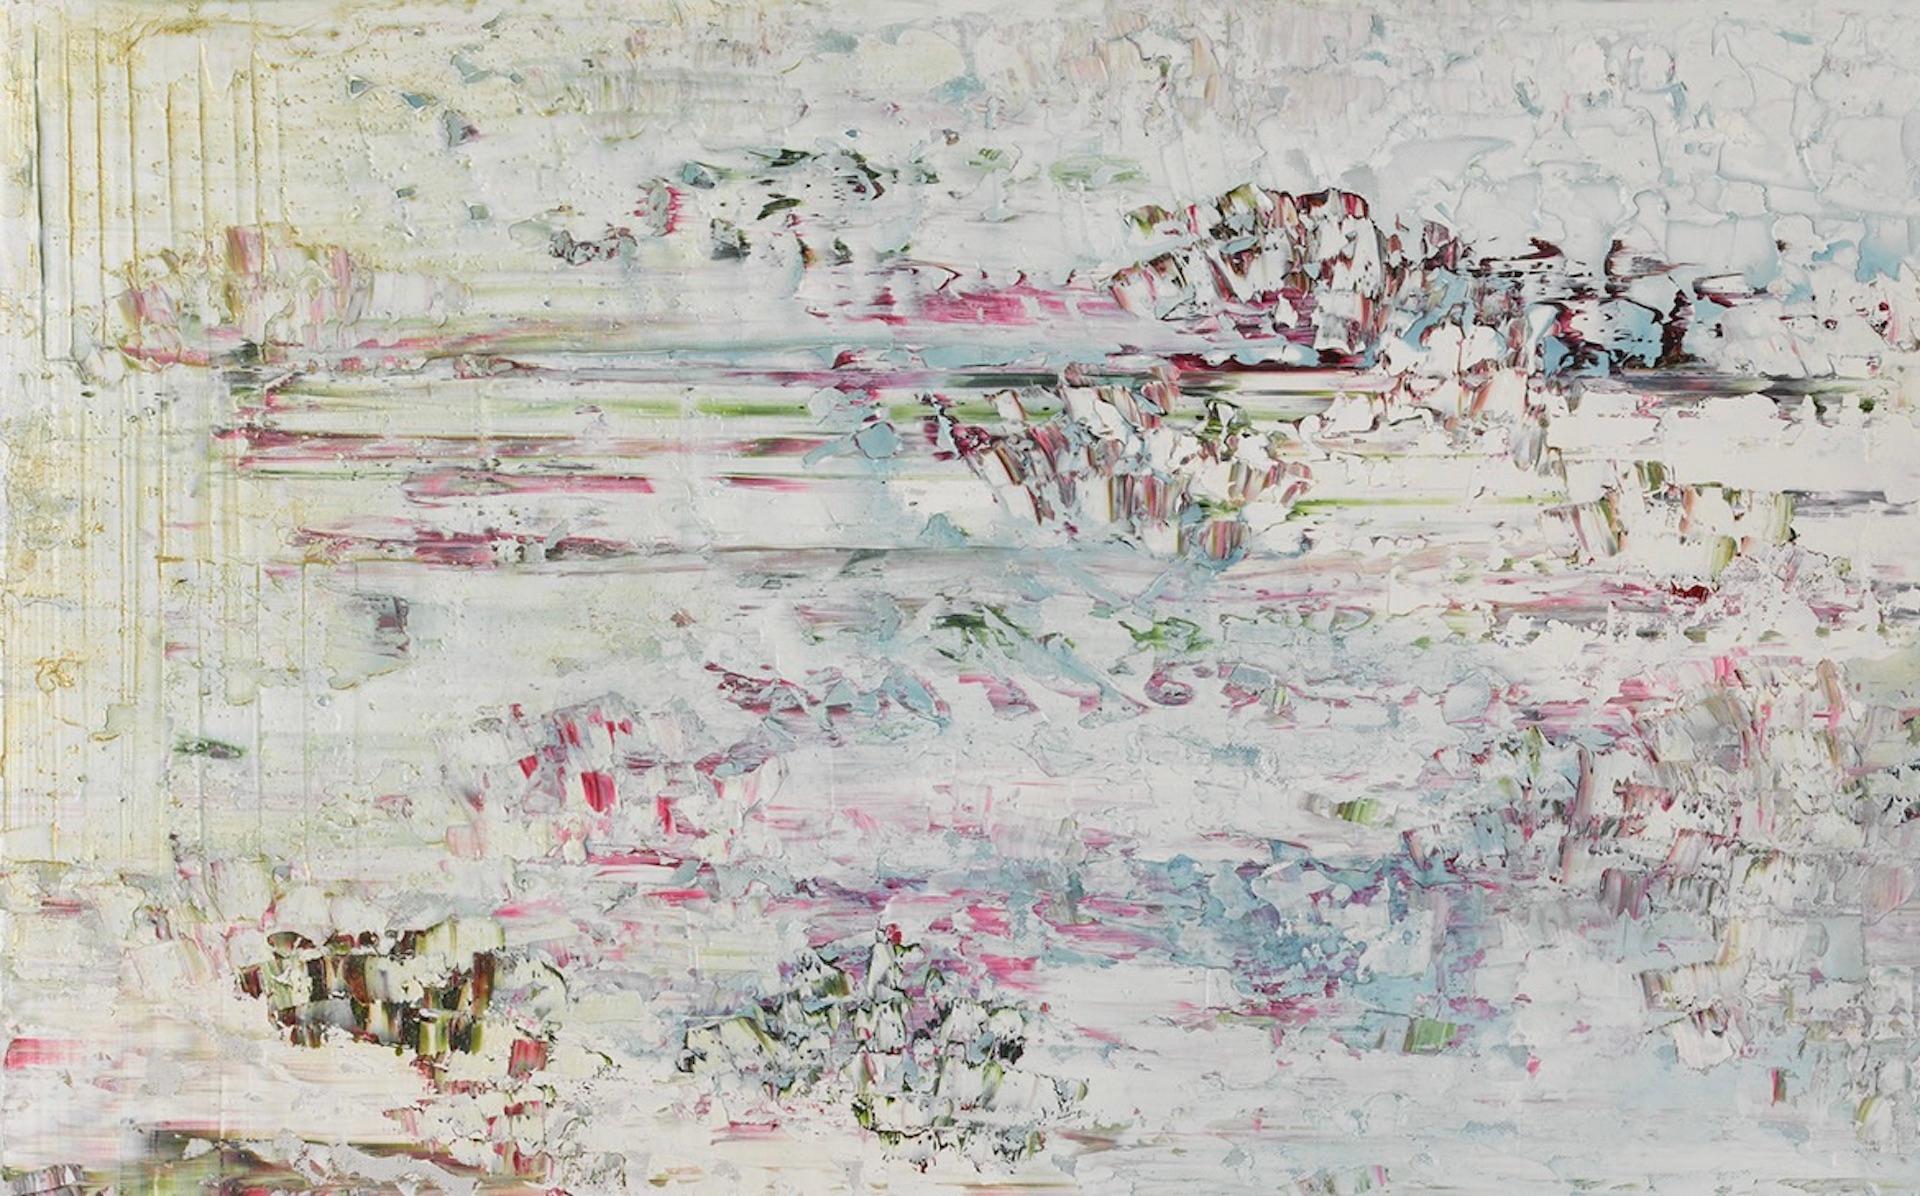 Painted Contemporary painting of rosy shades that references the lily ponds of Monet For Sale